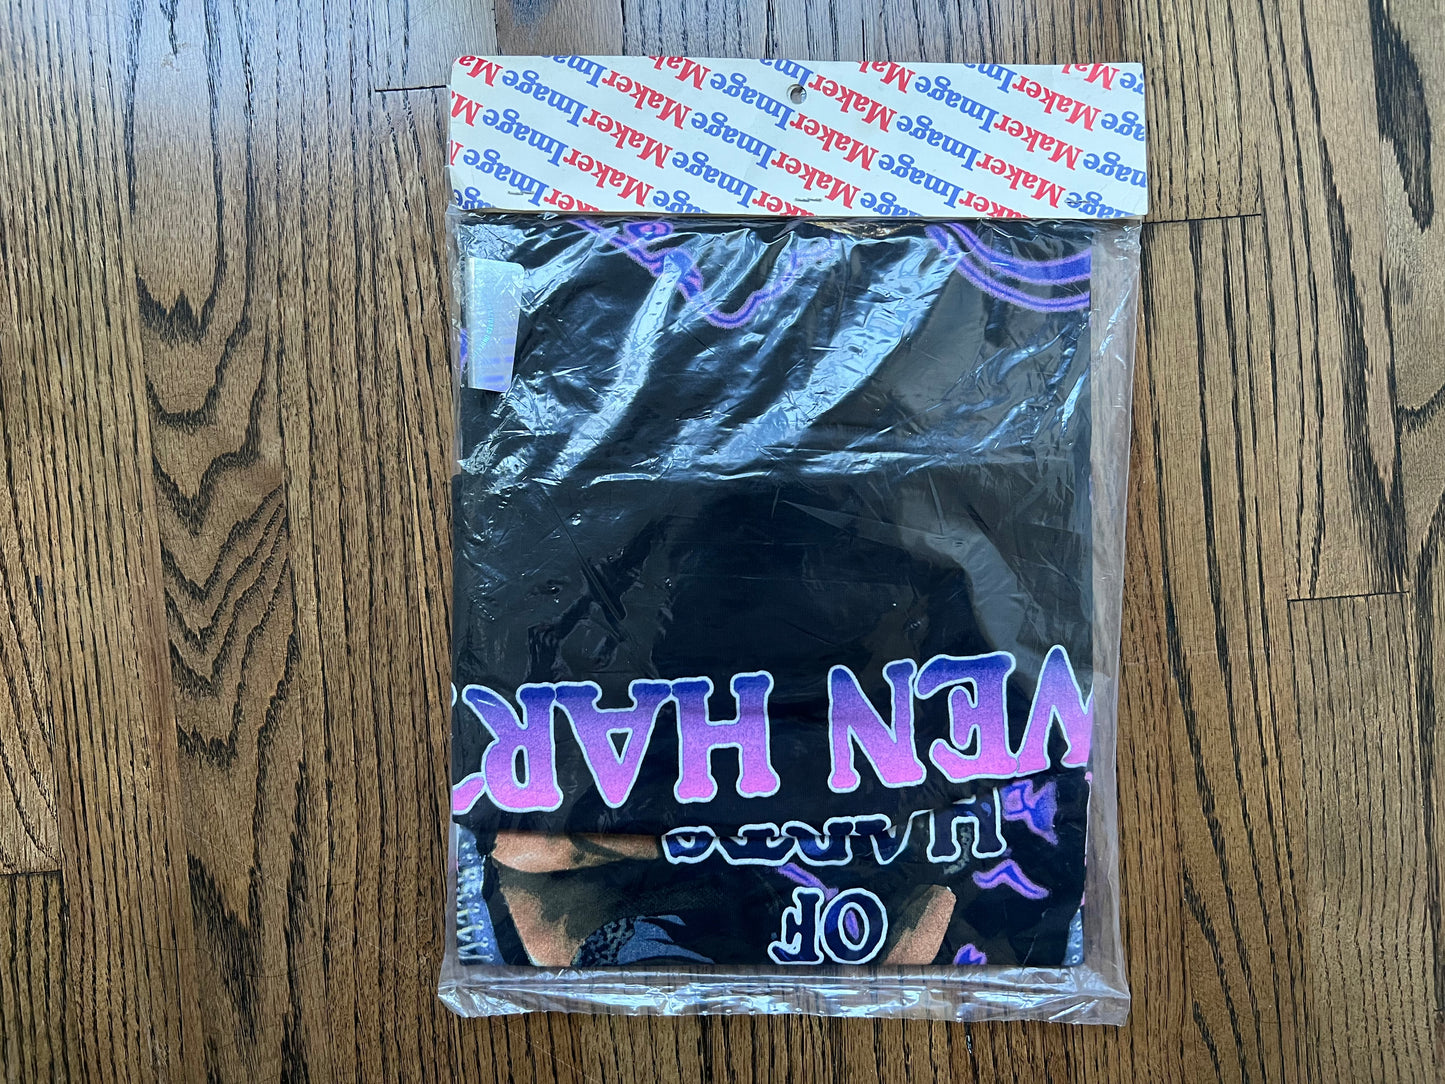 1996 WWF “The King of Harts” Owen Hart shirt in original packaging, fully sealed